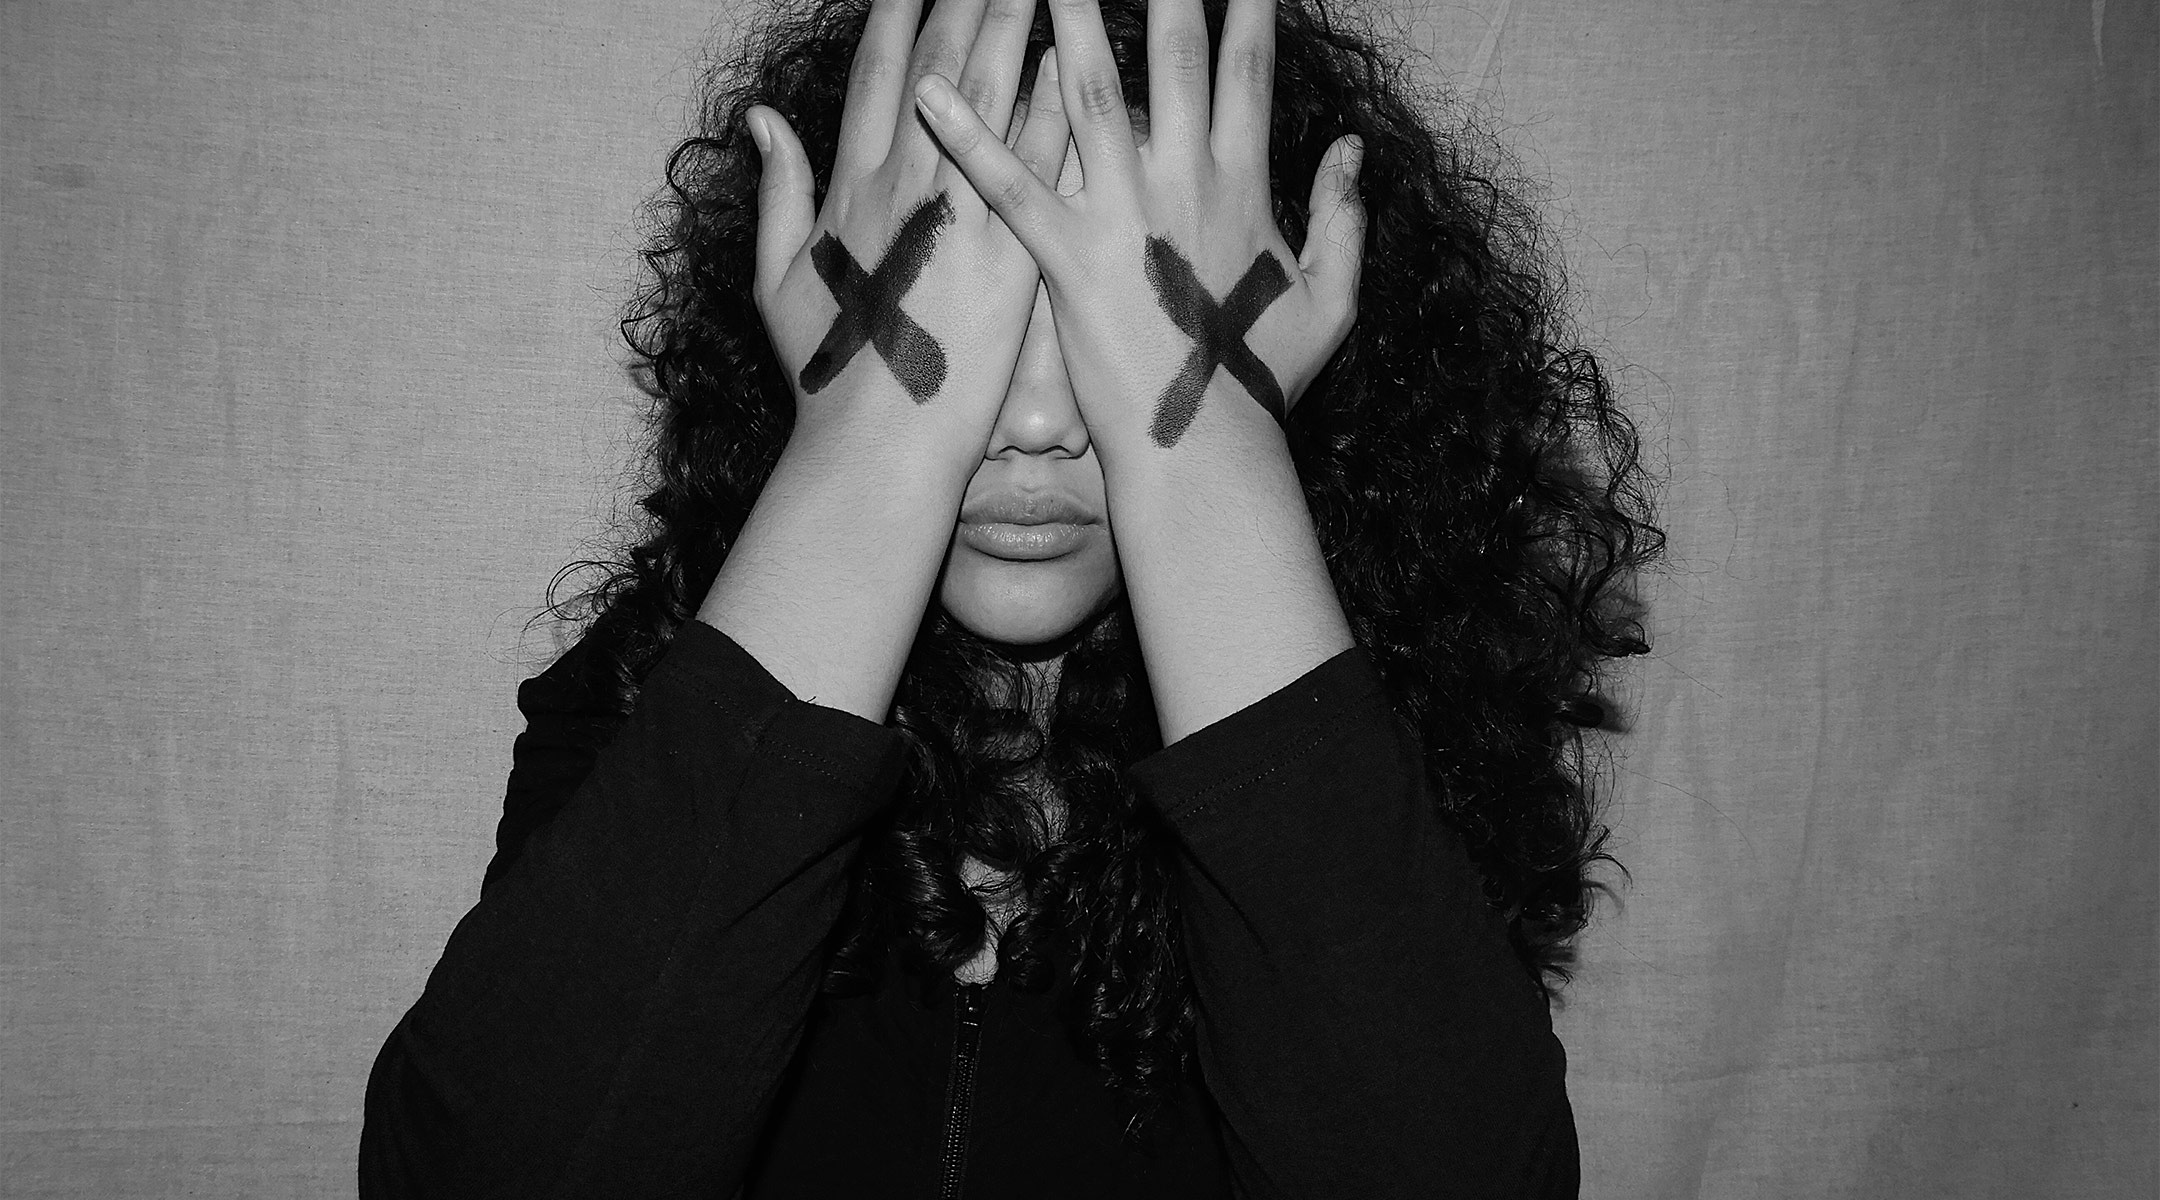 upset woman covering her face with her hands. Her hands have x's drawn on them.